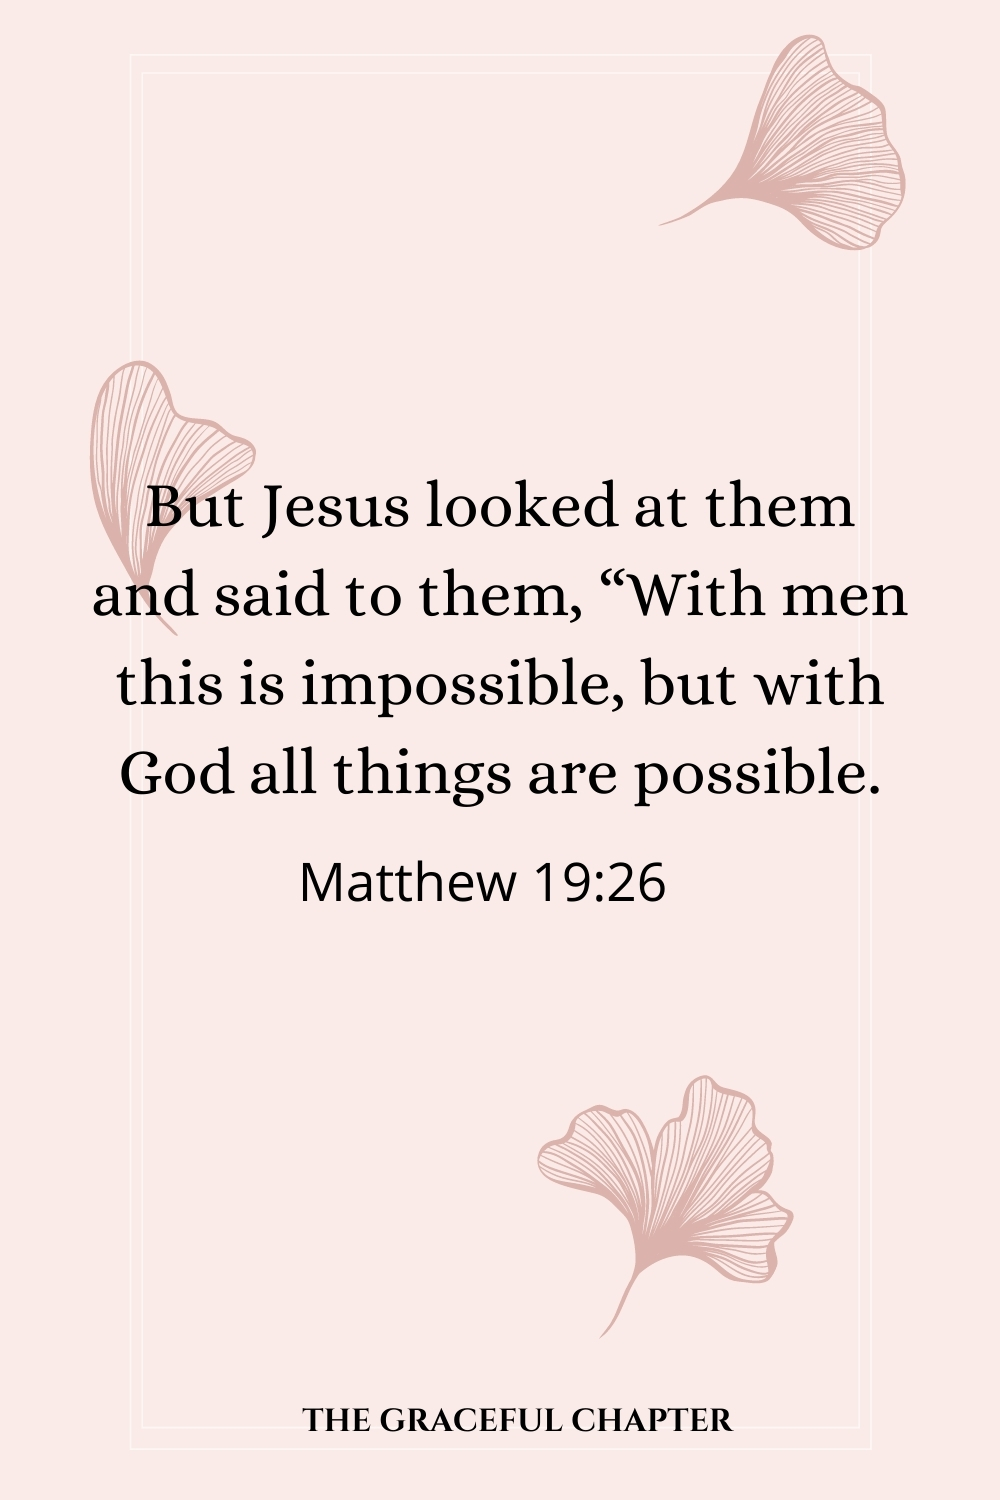 But Jesus looked at them and said, “With men it is impossible, but not with God; for with God all things are possible. Matthew 19:26But Jesus looked at them and said, “With men it is impossible, but not with God; for with God all things are possible.” Mark 10:27